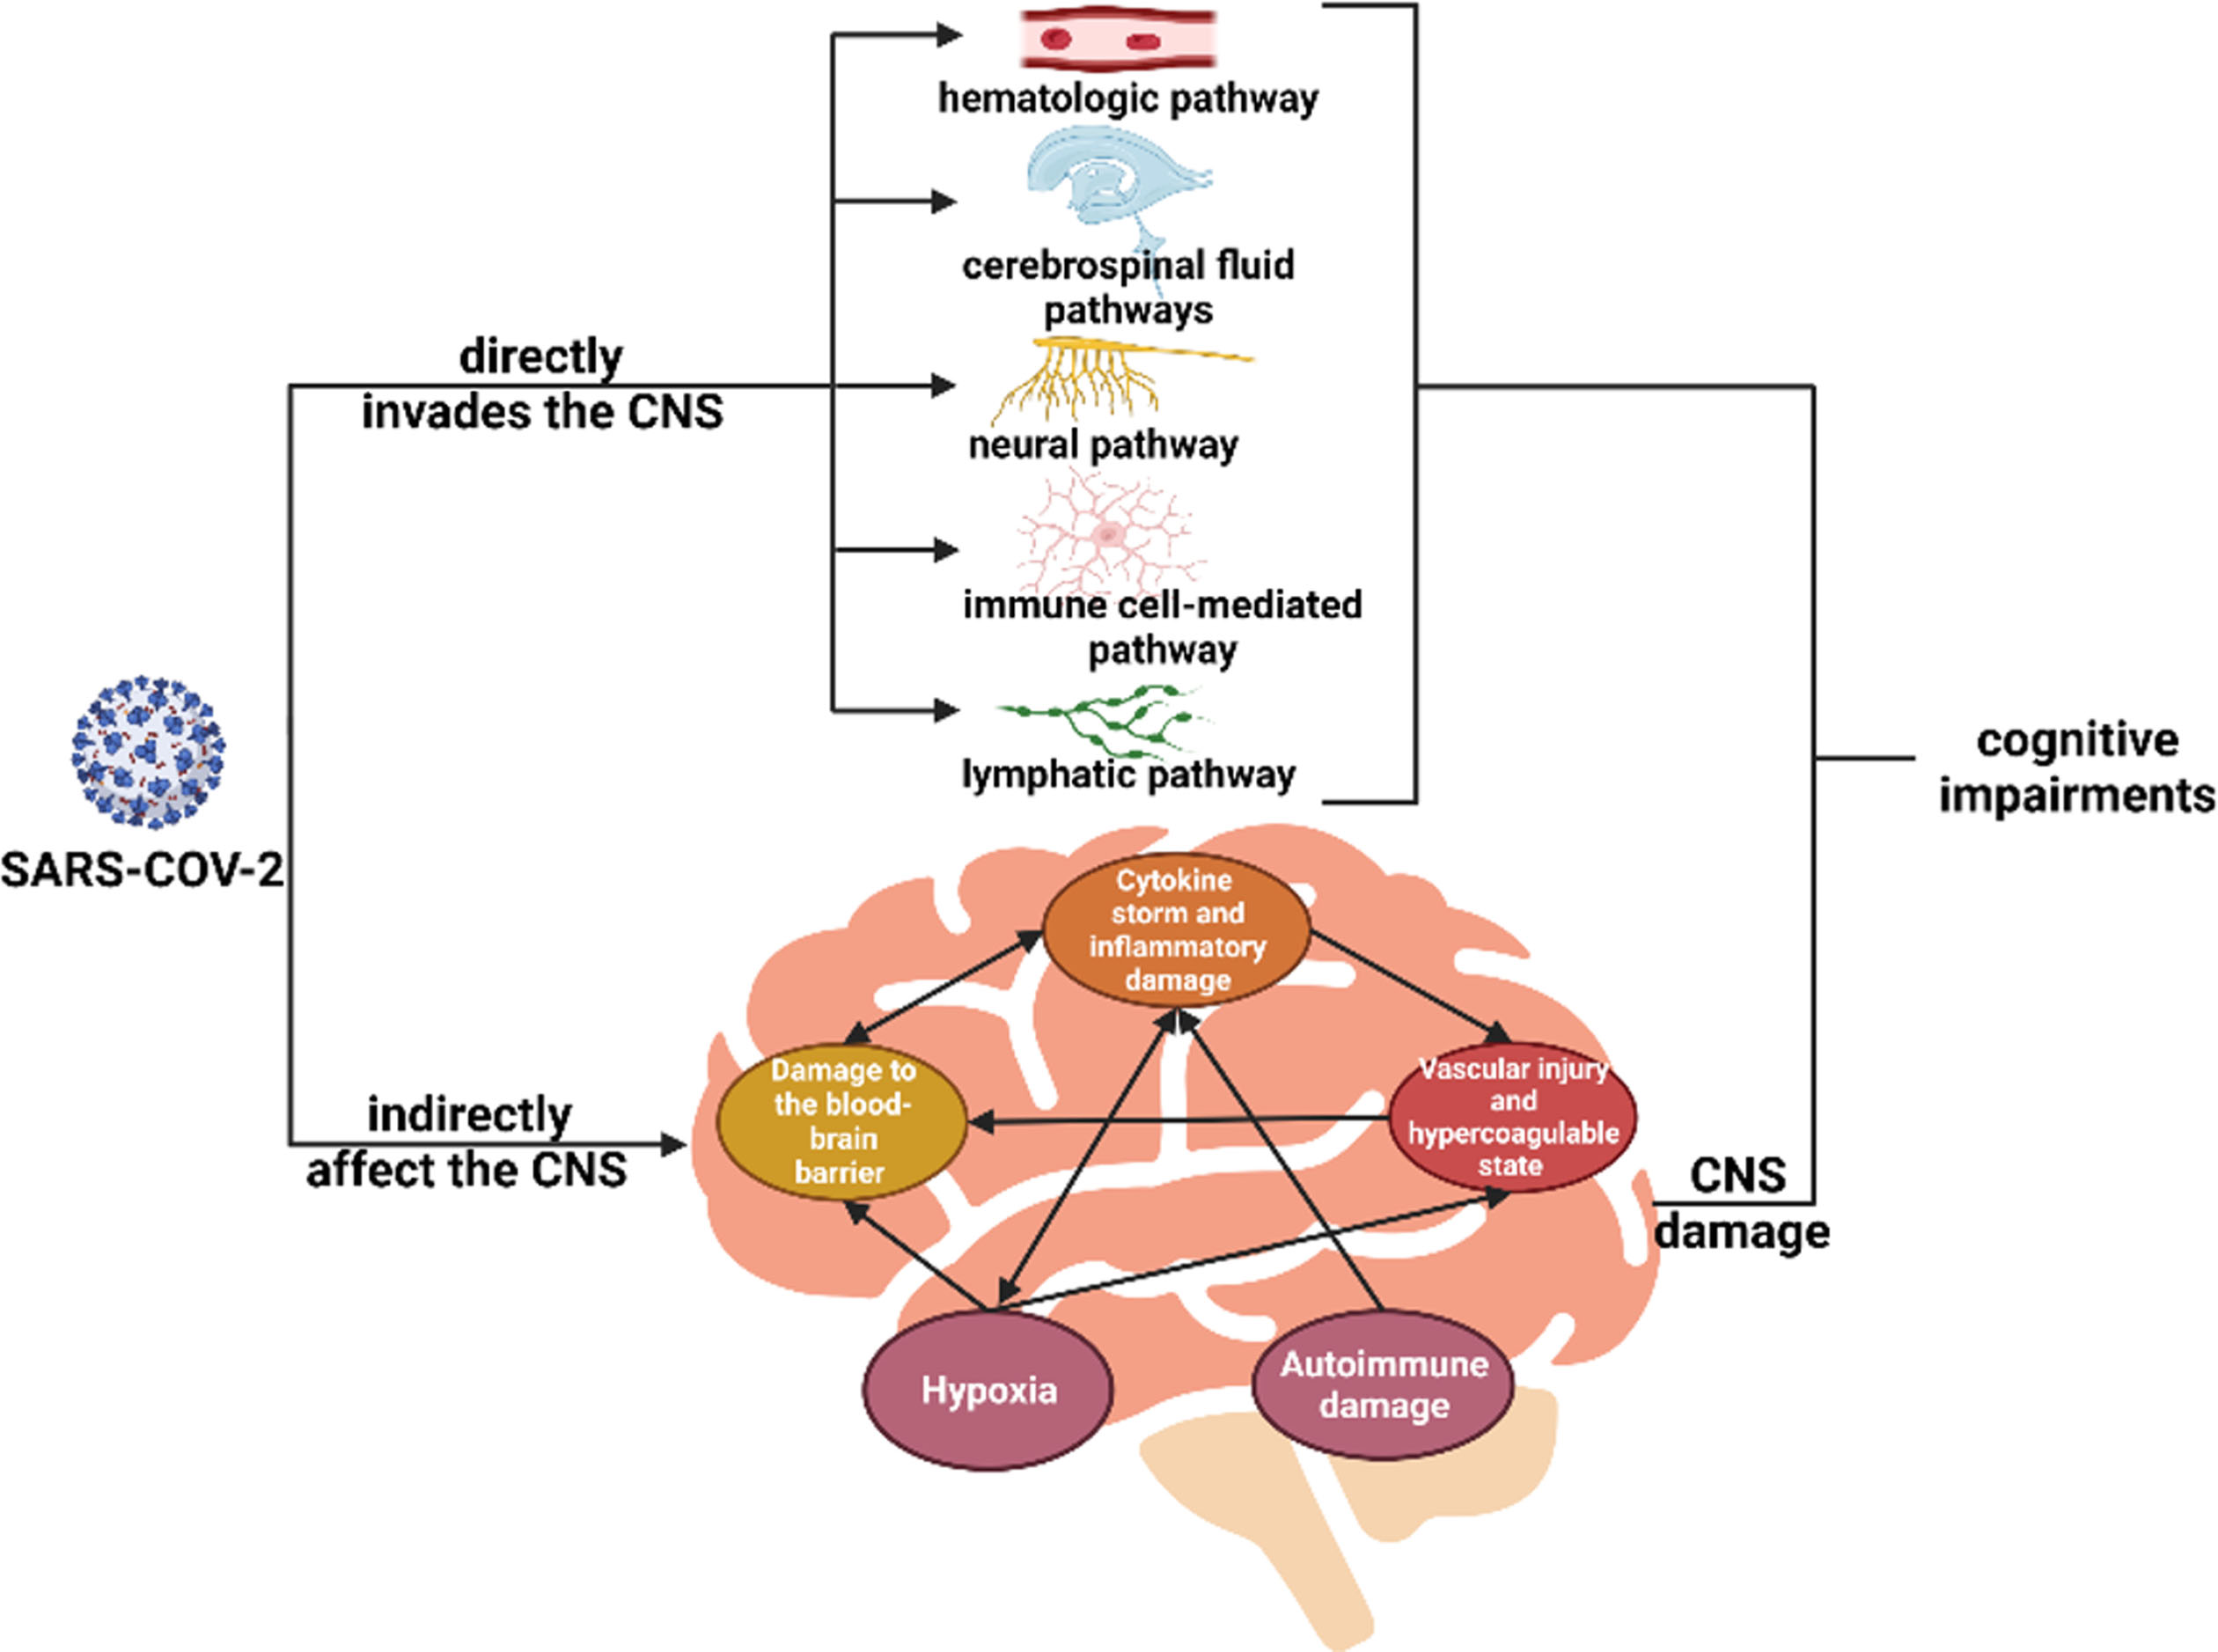 Possible pathophysiological mechanisms of cognitive impairment in COVID-19.